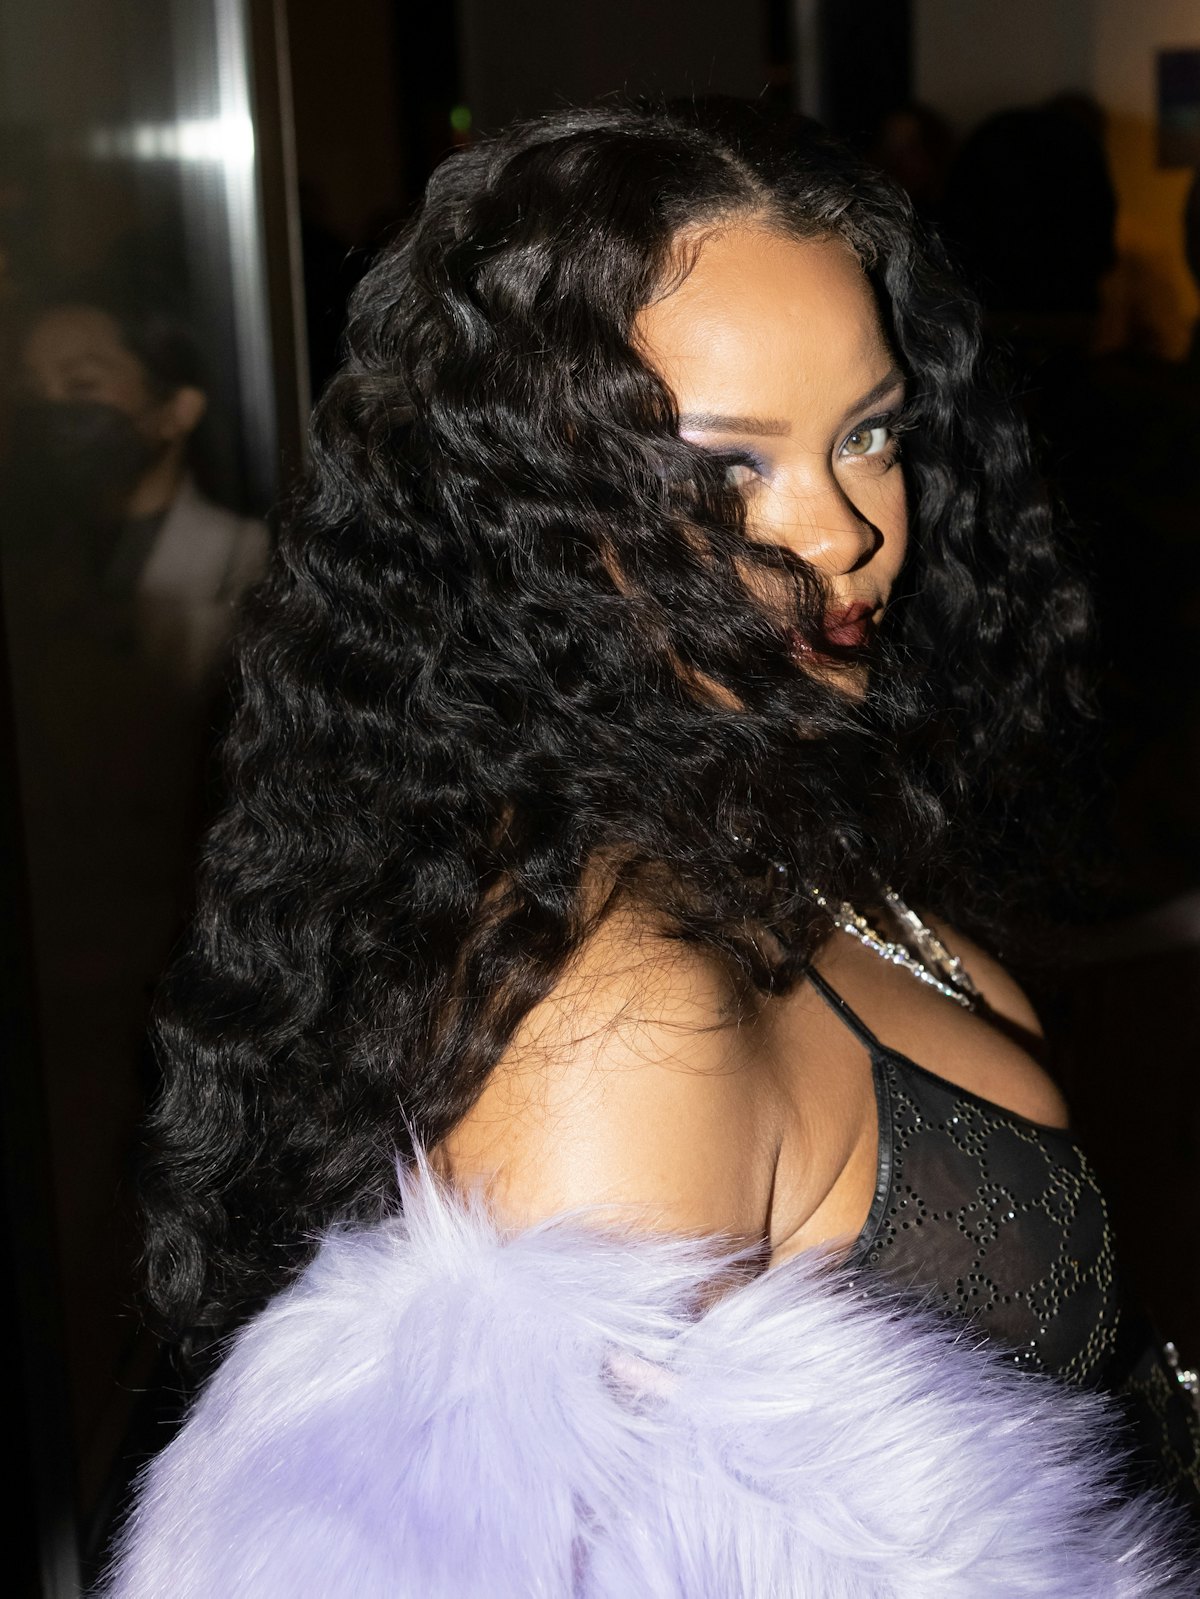 MILAN, ITALY - FEBRUARY 25: Rihanna is seen during the Milan Fashion Week Fall/Winter 2022/2023 on F...